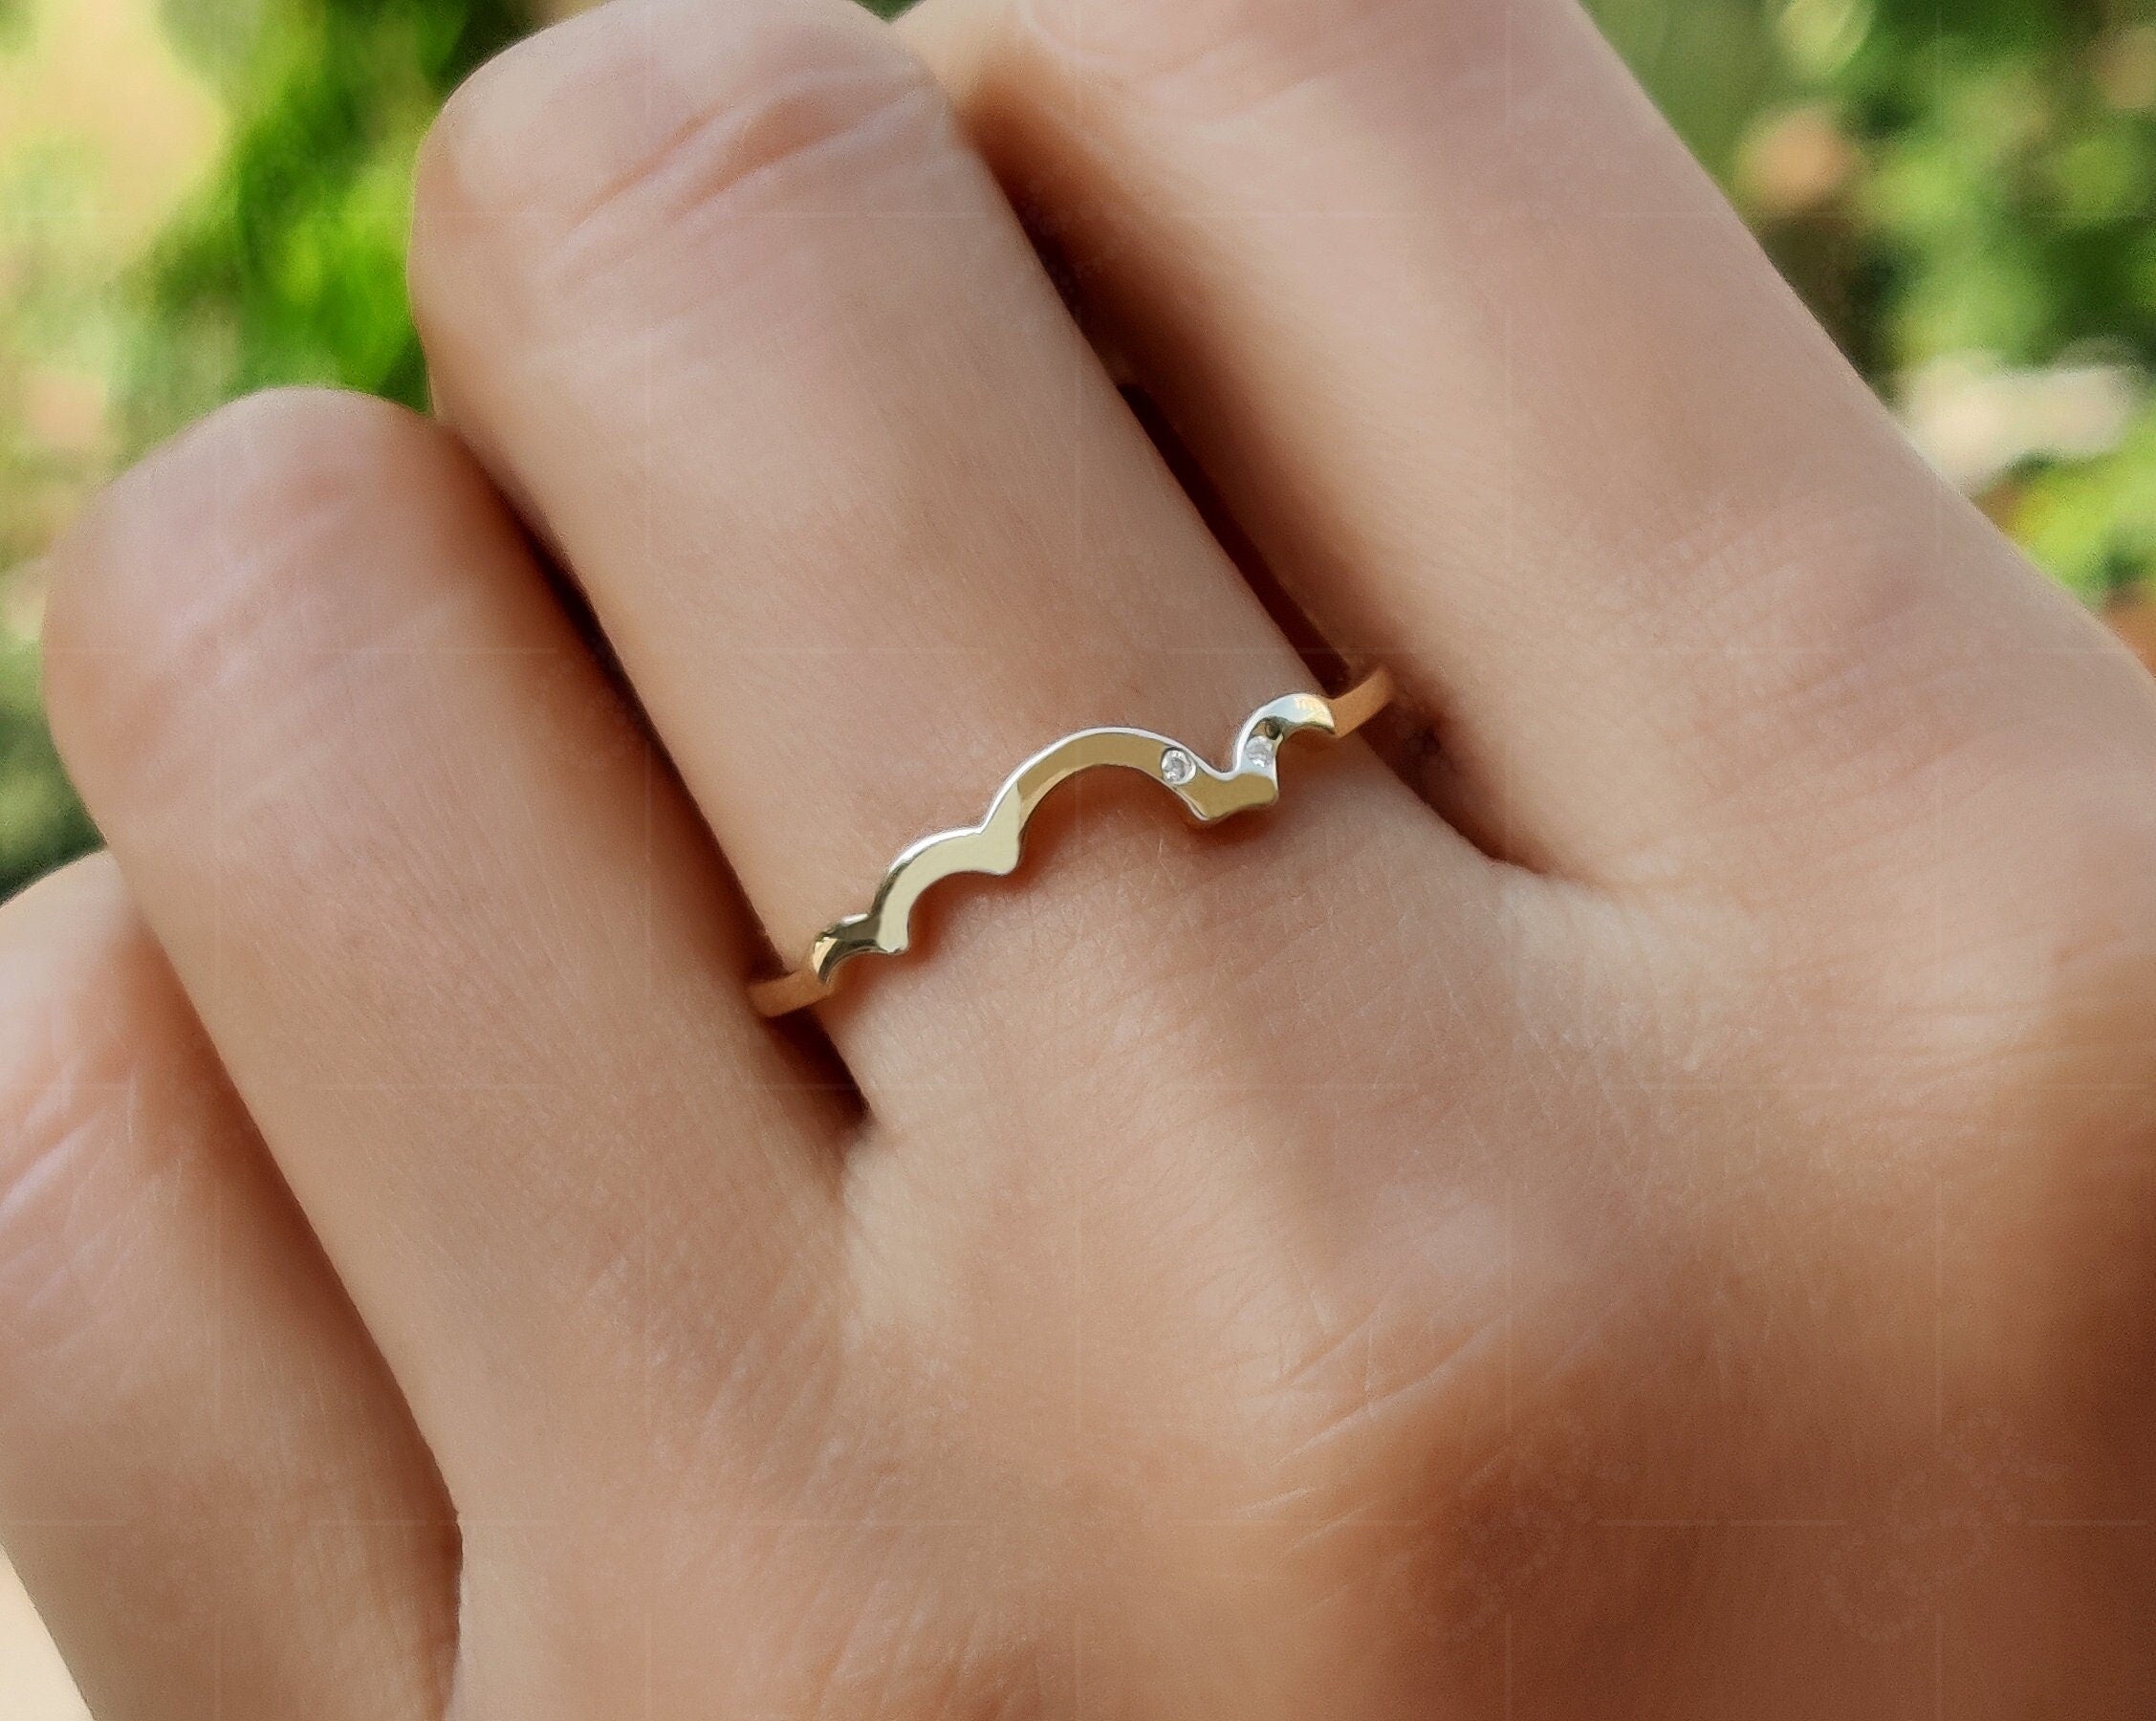 Elegant Plain Gold and Silver Wave Style Band - Minimalist Gold Ring for Dainty Wedding Band Women - Ocean Wave Delicate Stackable Beauty with Flush Two Stone Band